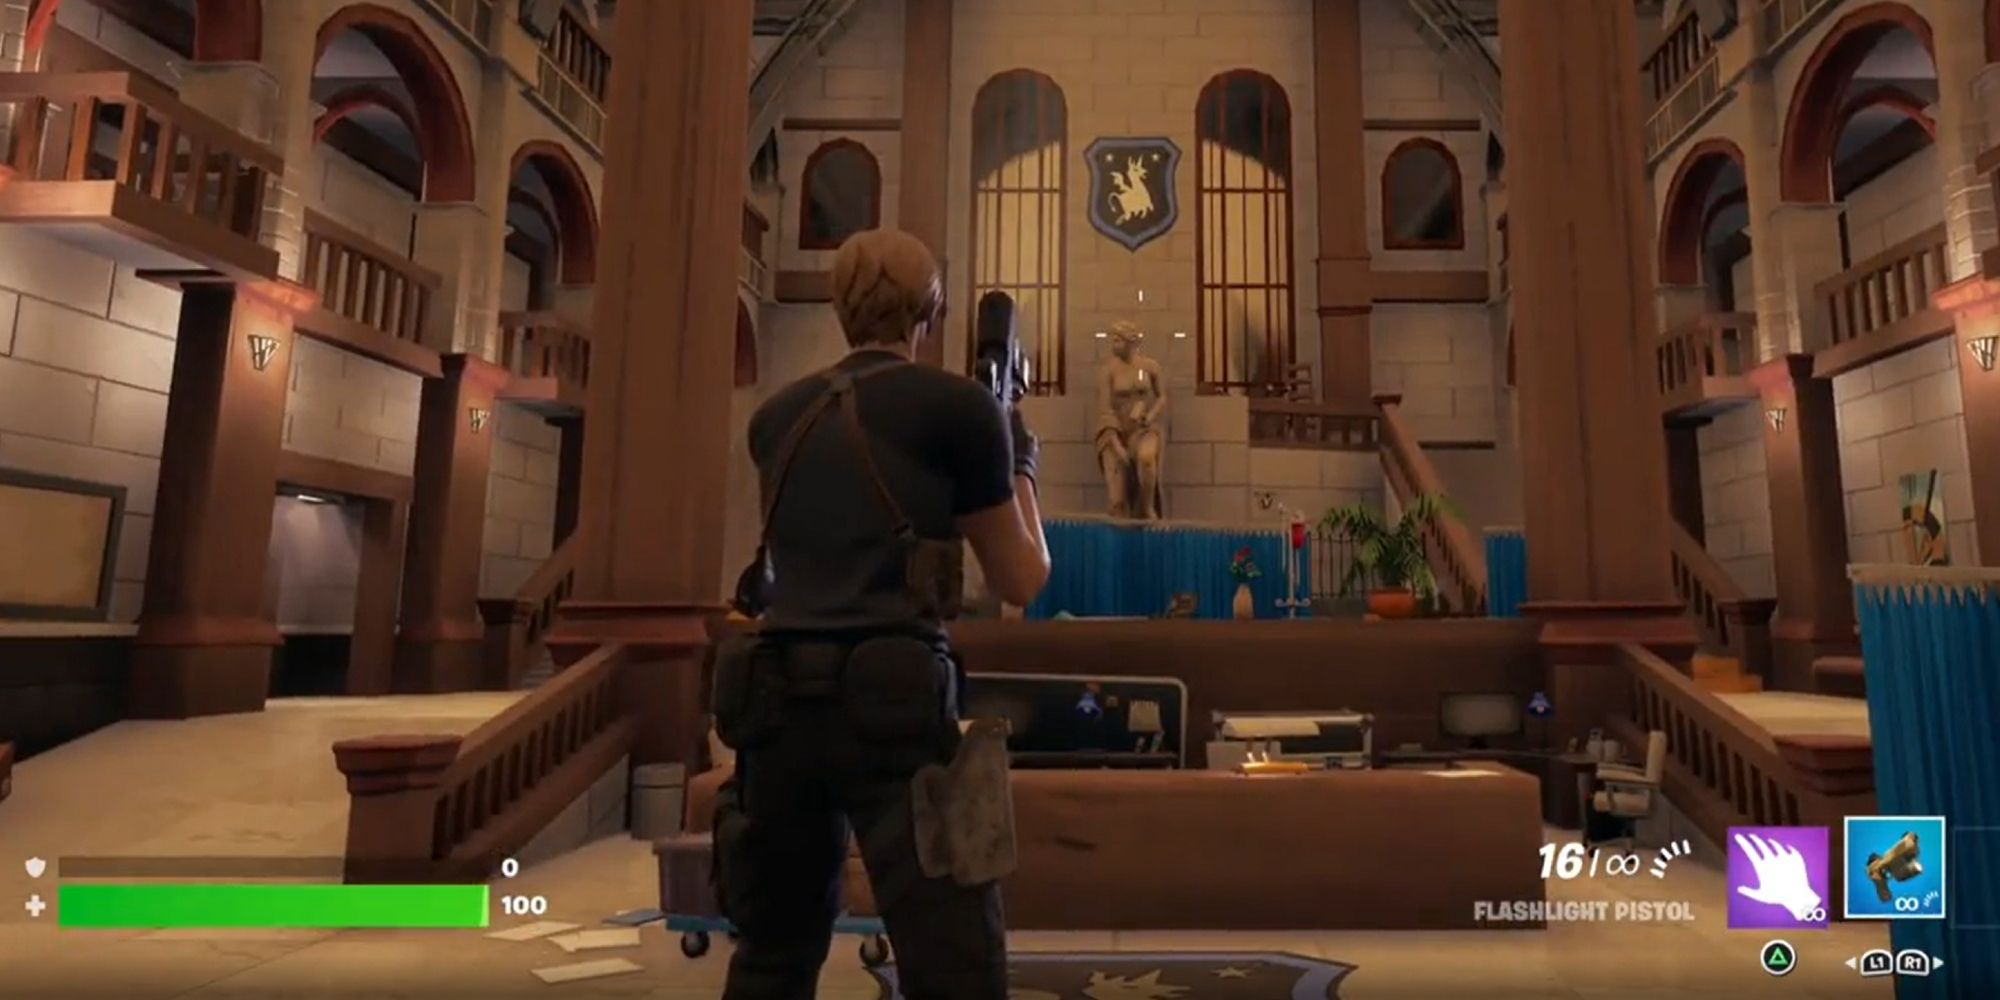 The police station reception from Resident Evil 2 recreated in Fortnite.